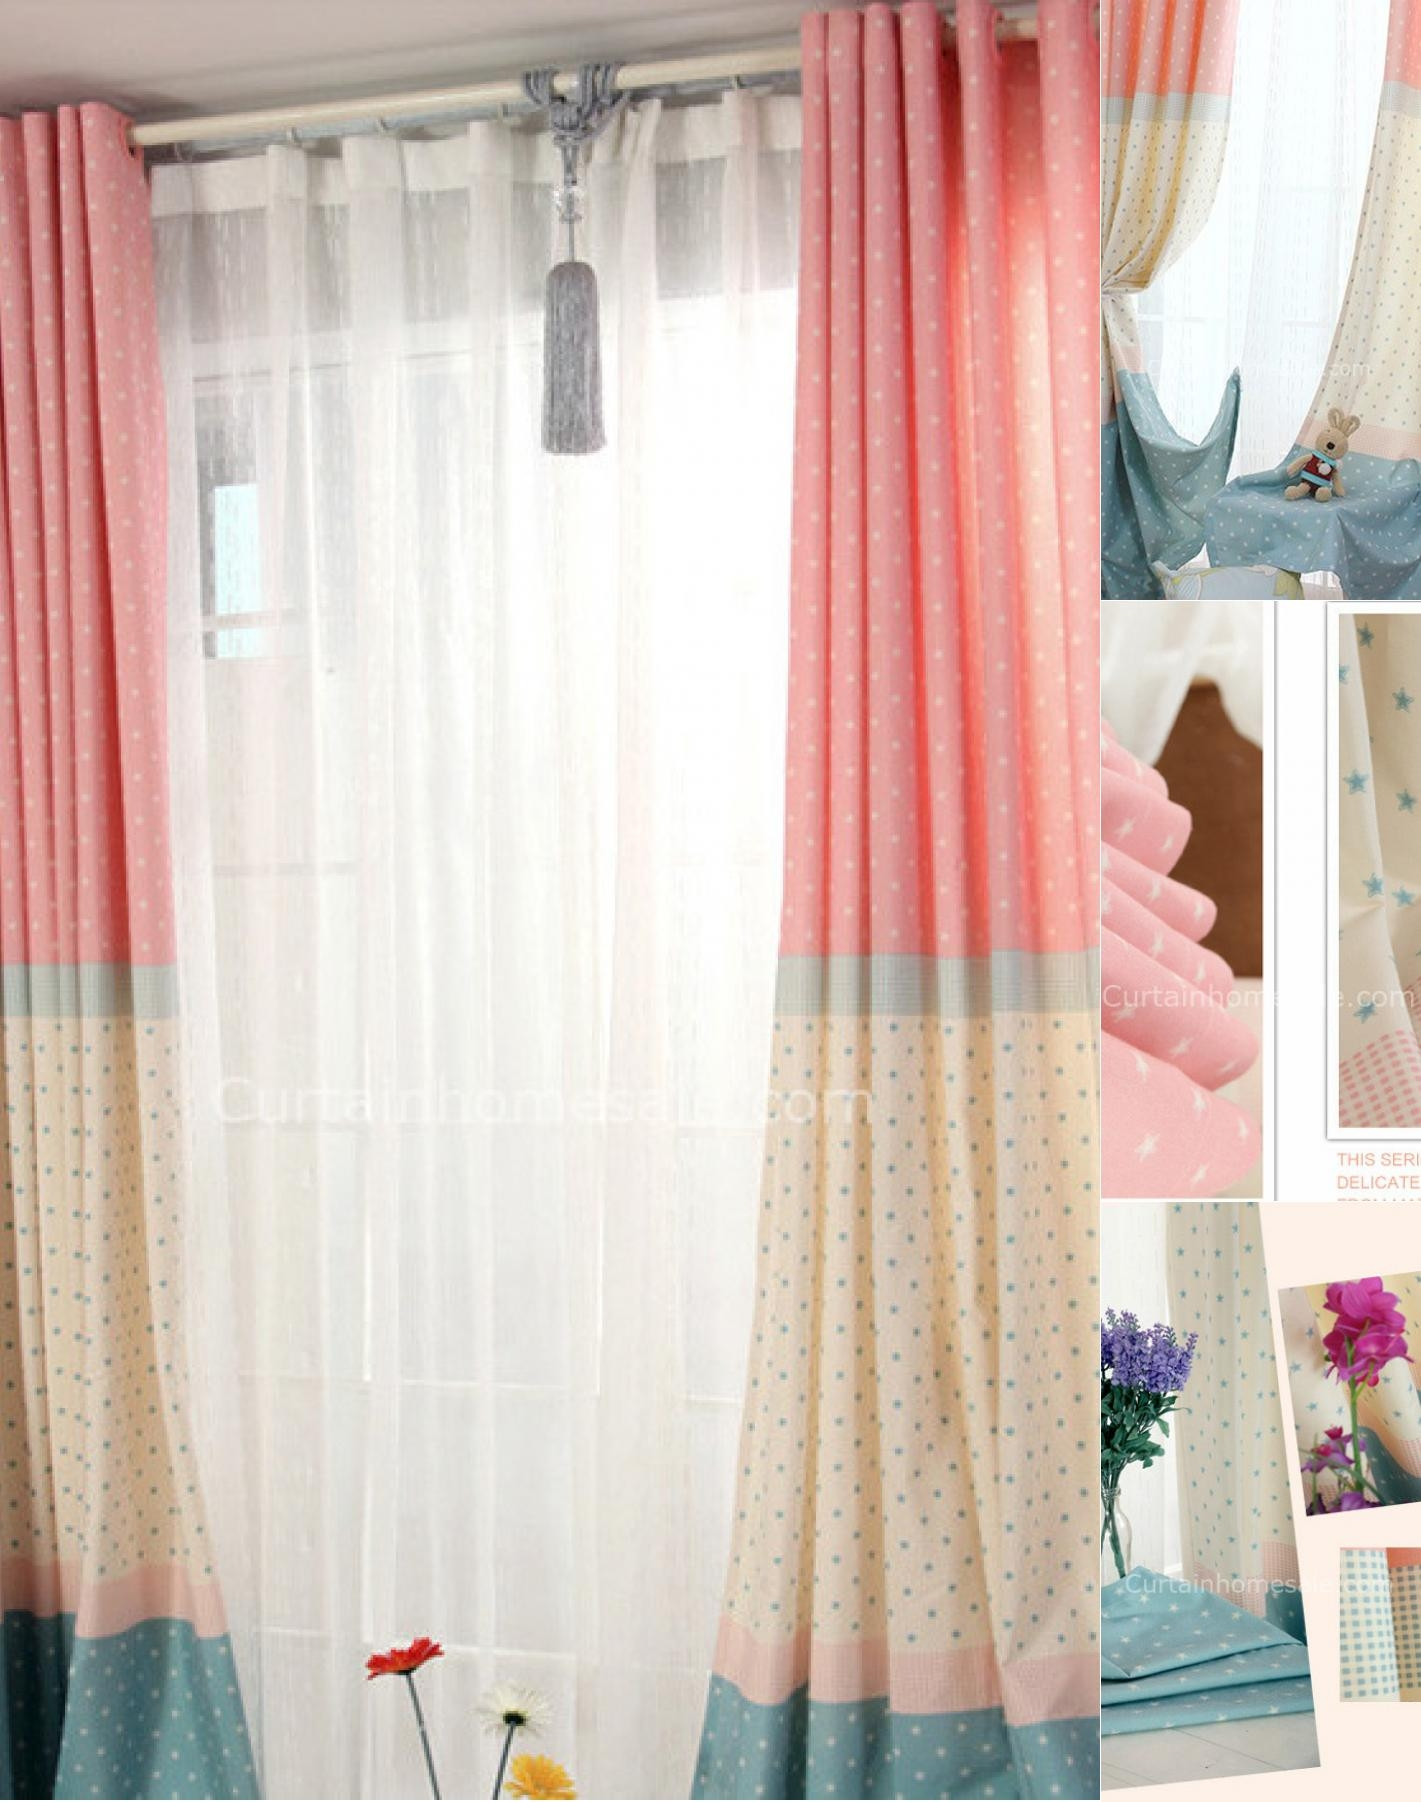 Girls Bedroom Curtains
 25 Collection of Bedroom Curtains for Girls